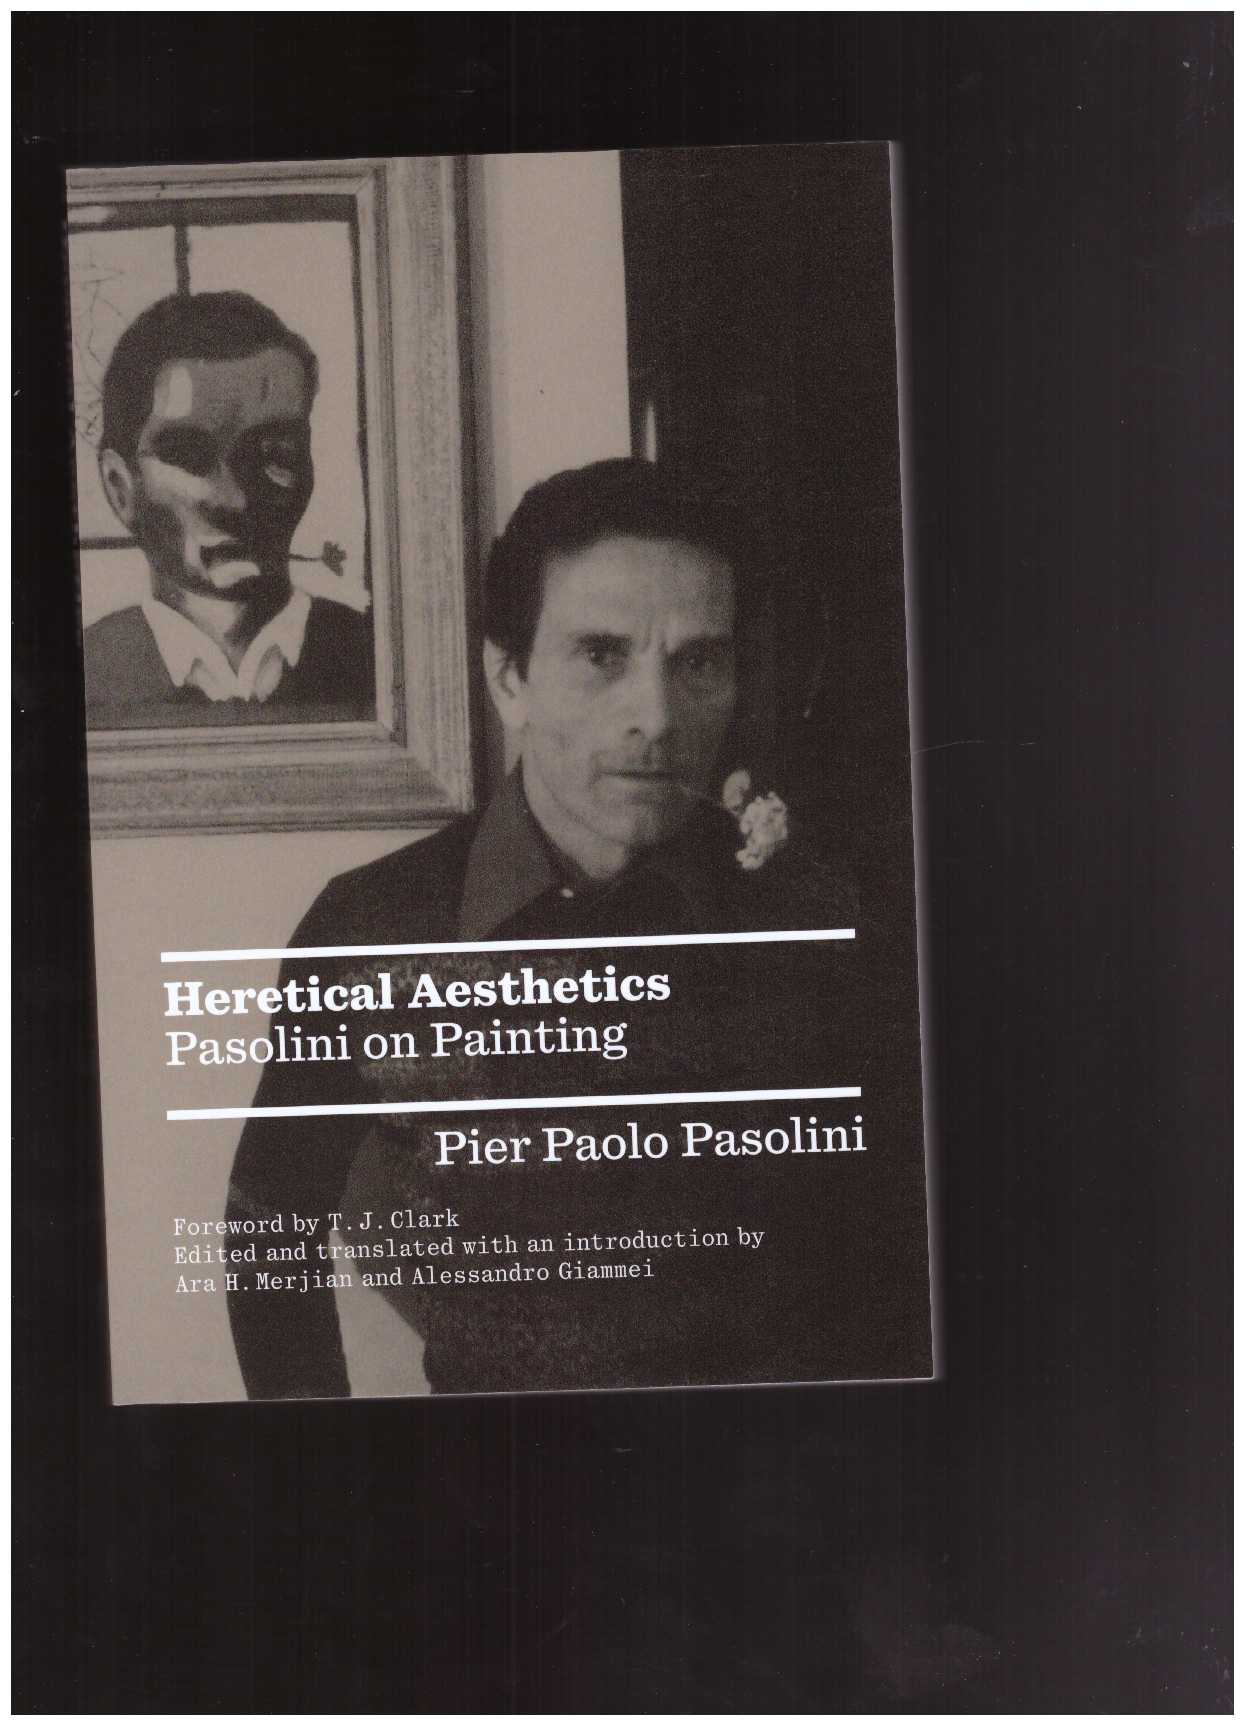 PASOLINI, Pier Paolo - Heretical Aesthetics